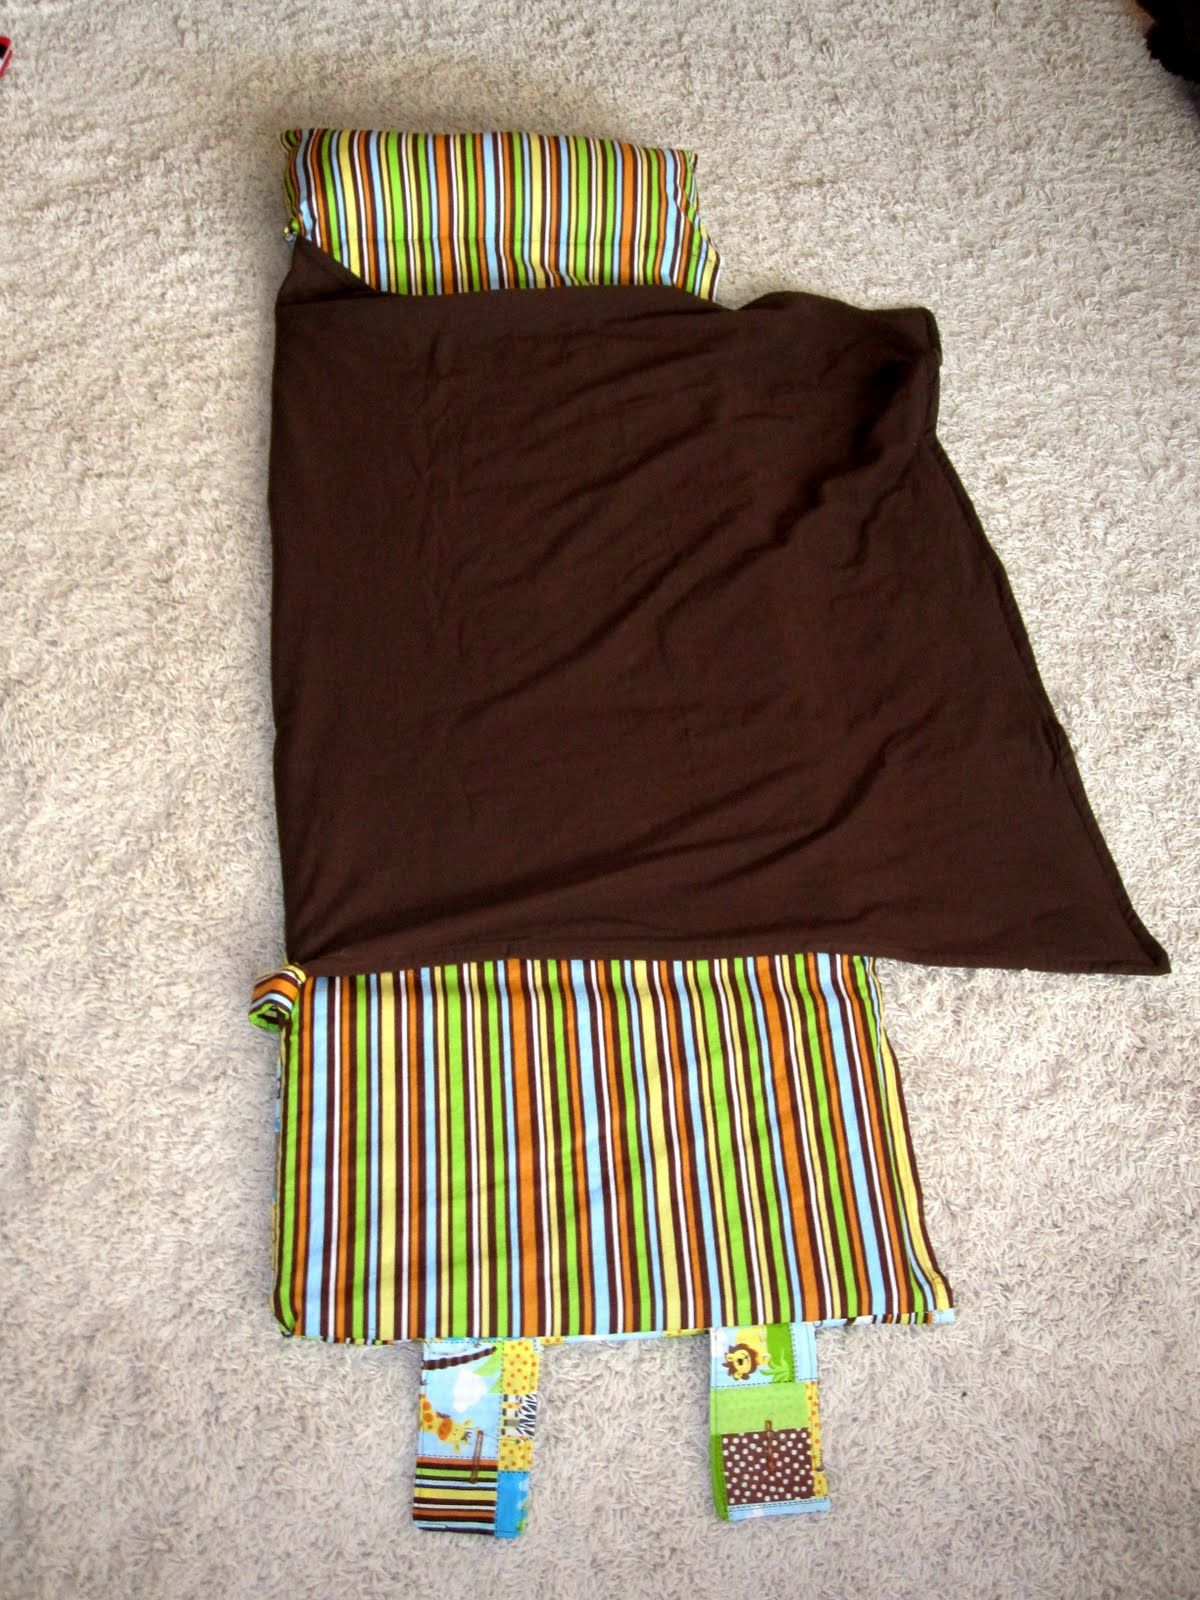 Nap mat with attached blanket and pillow.  Great tutorial PDF.